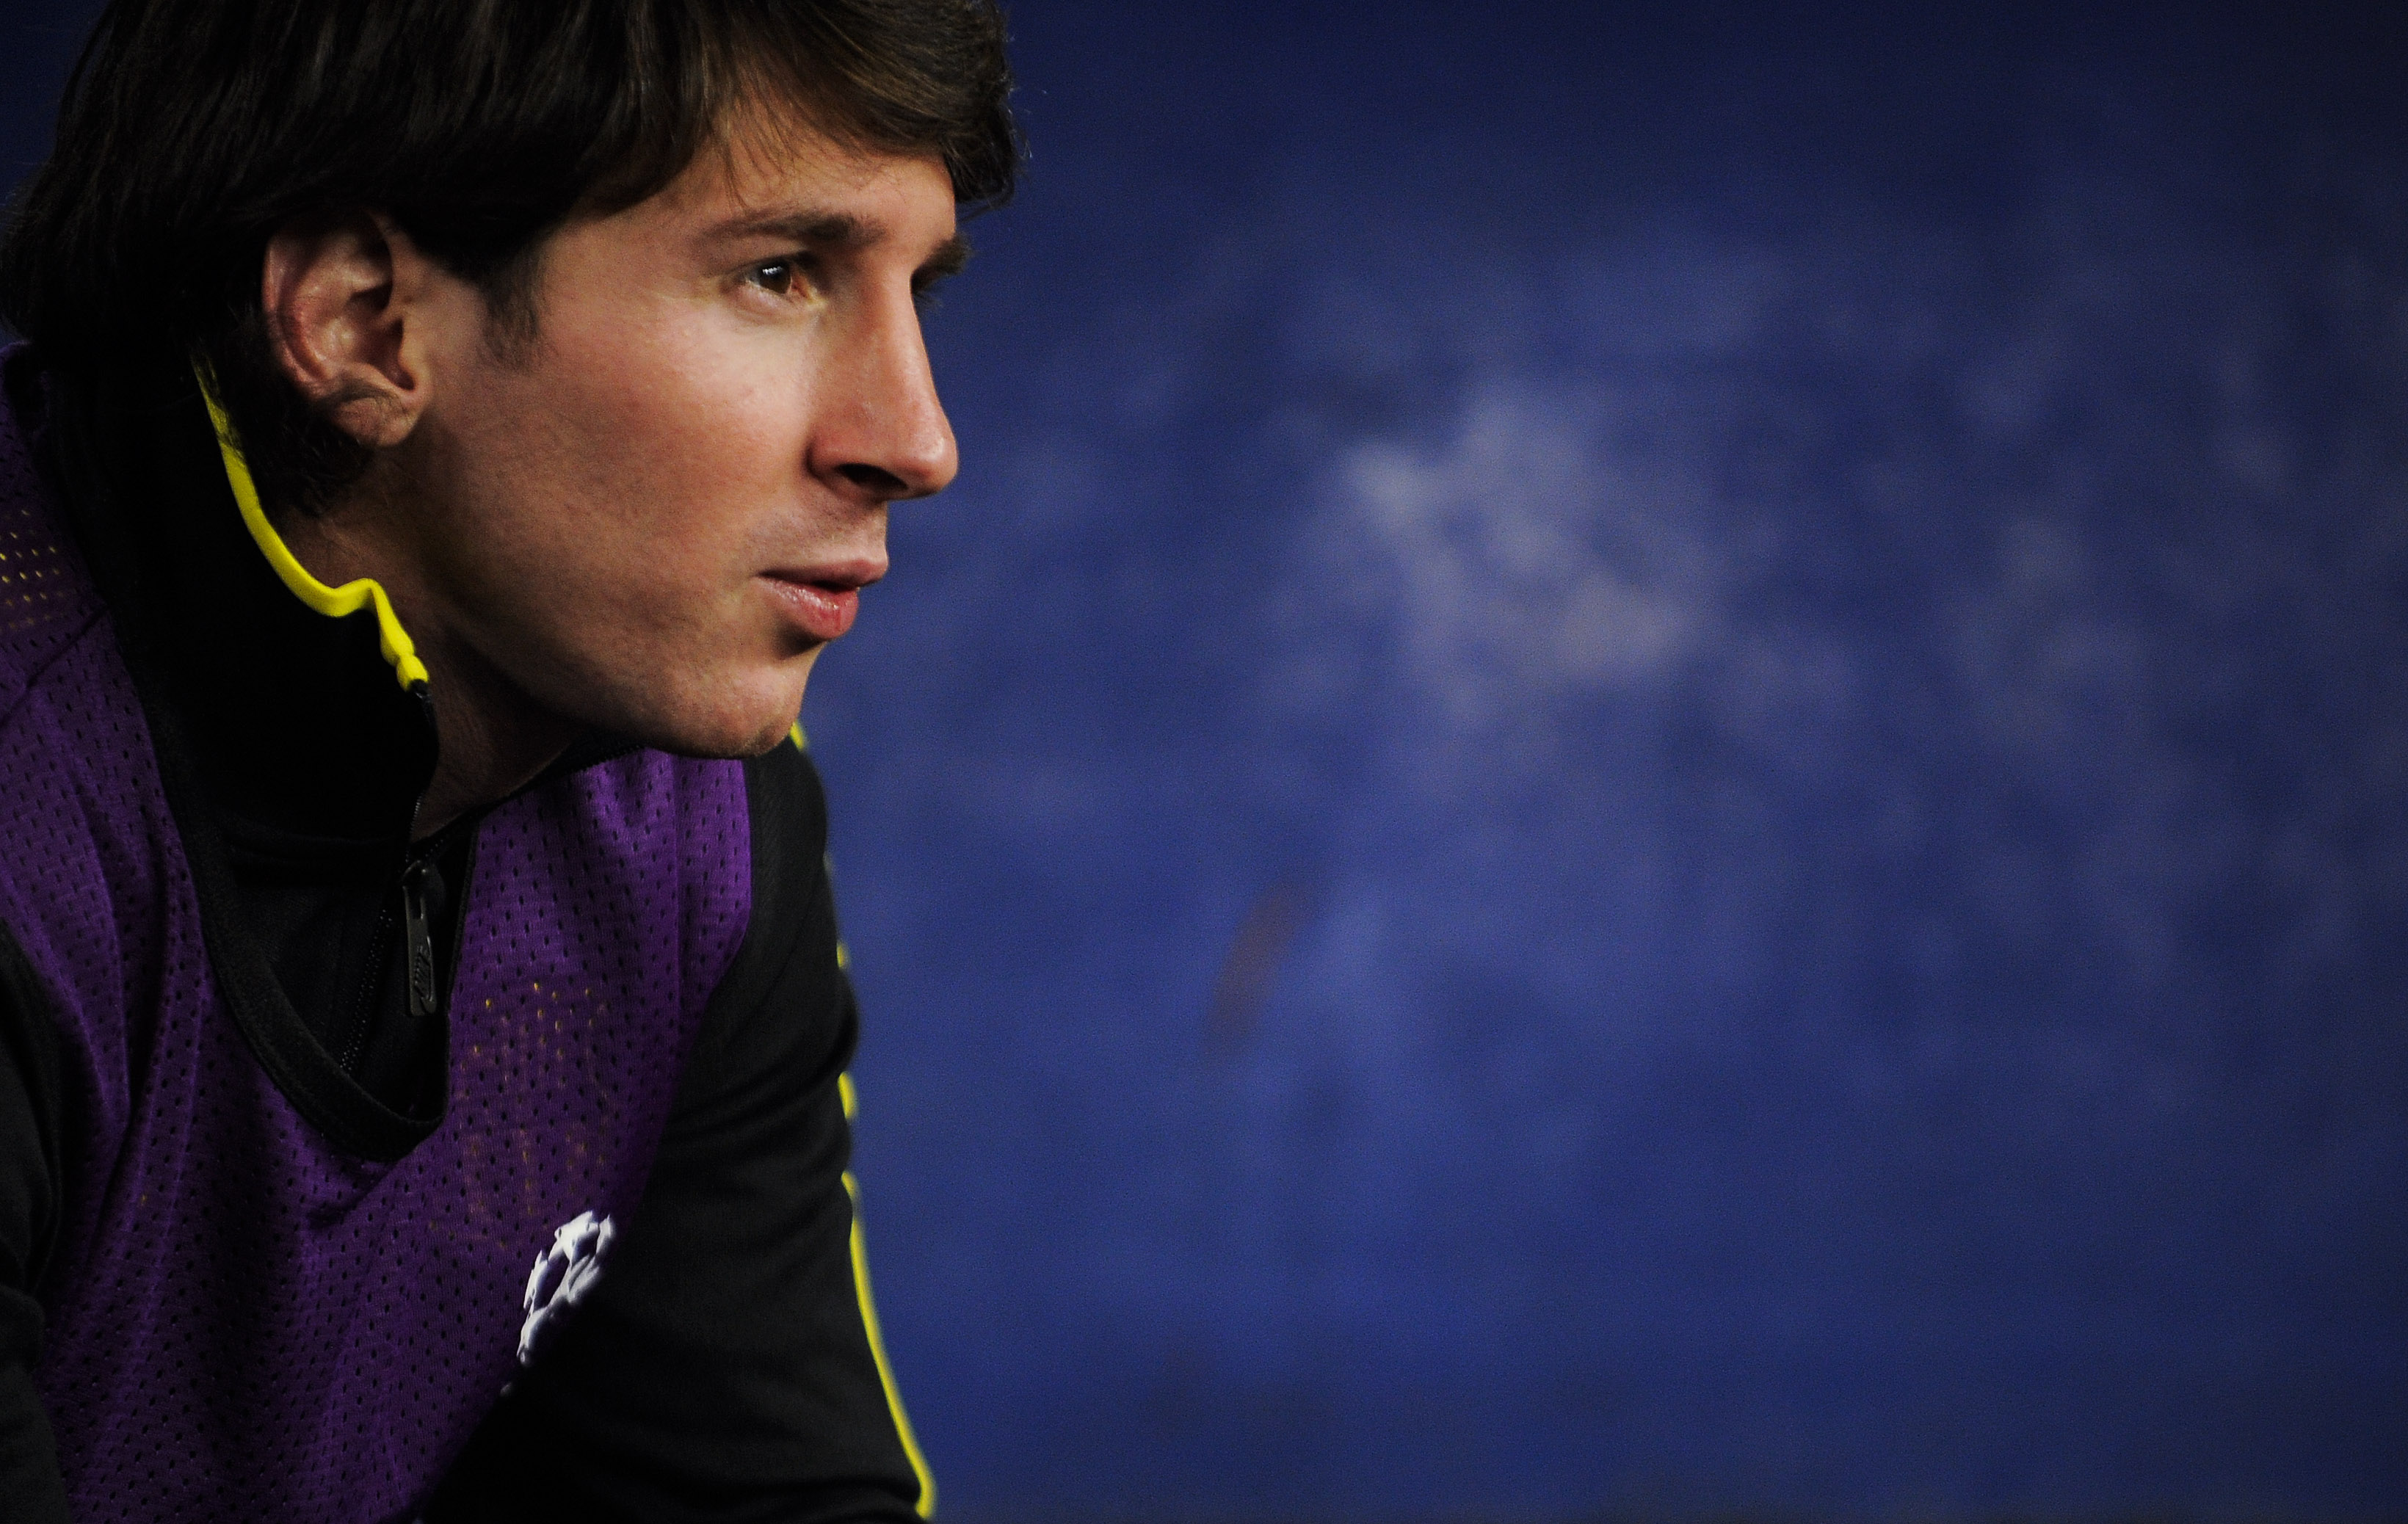 BARCELONA, SPAIN - DECEMBER 07:  Lionel Messi of Barcelona looks on from the bench prior the Champions League match between Barcelona and Rubin Kazan at Camp Nou Stadium on December 7, 2010 in Barcelona, Spain. Barcelona won 2-0.  (Photo by David Ramos/Ge